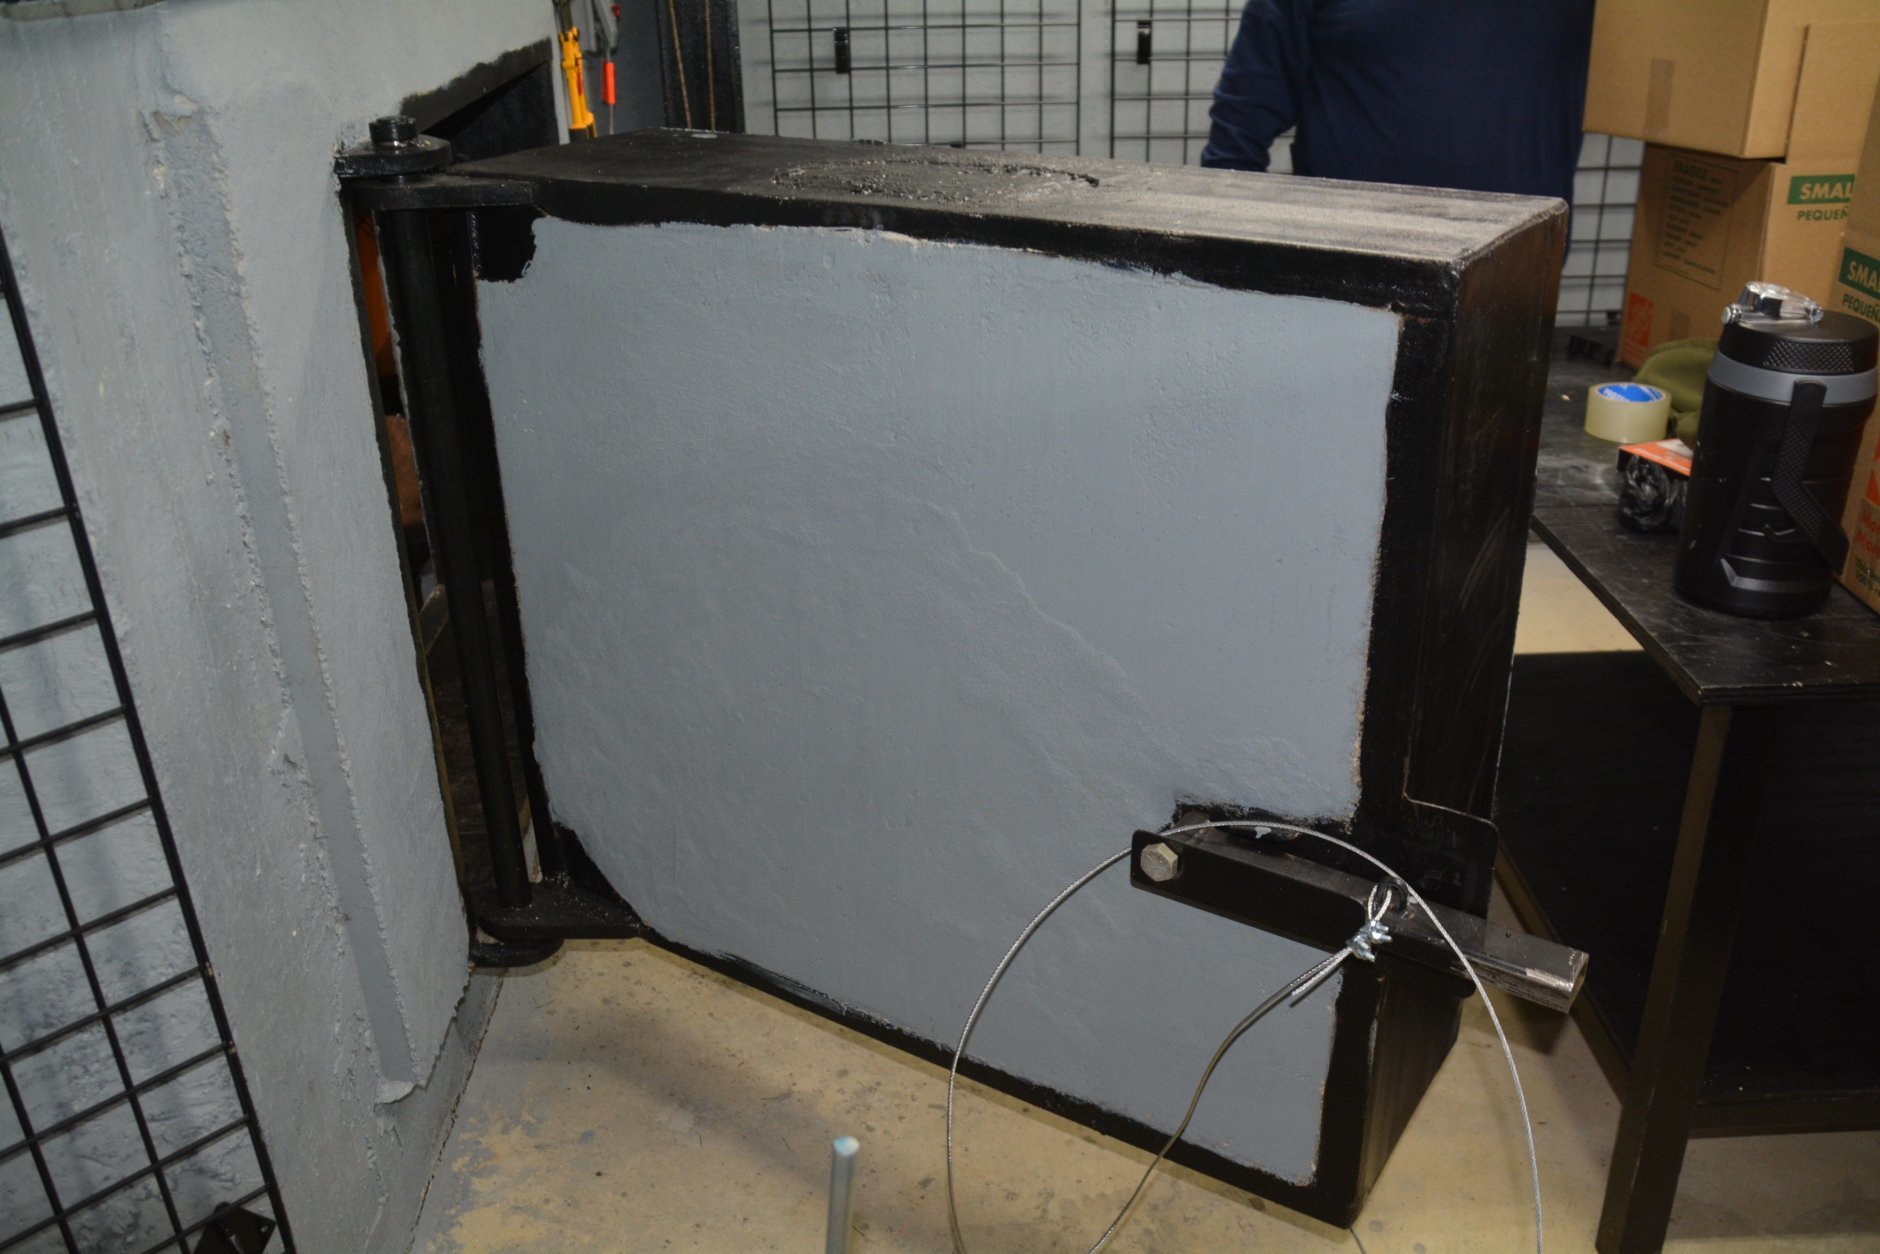 The door to Bailey's bunker, where officials found the illegal guns. (Photo courtesy of U.S. Attorney's Office)